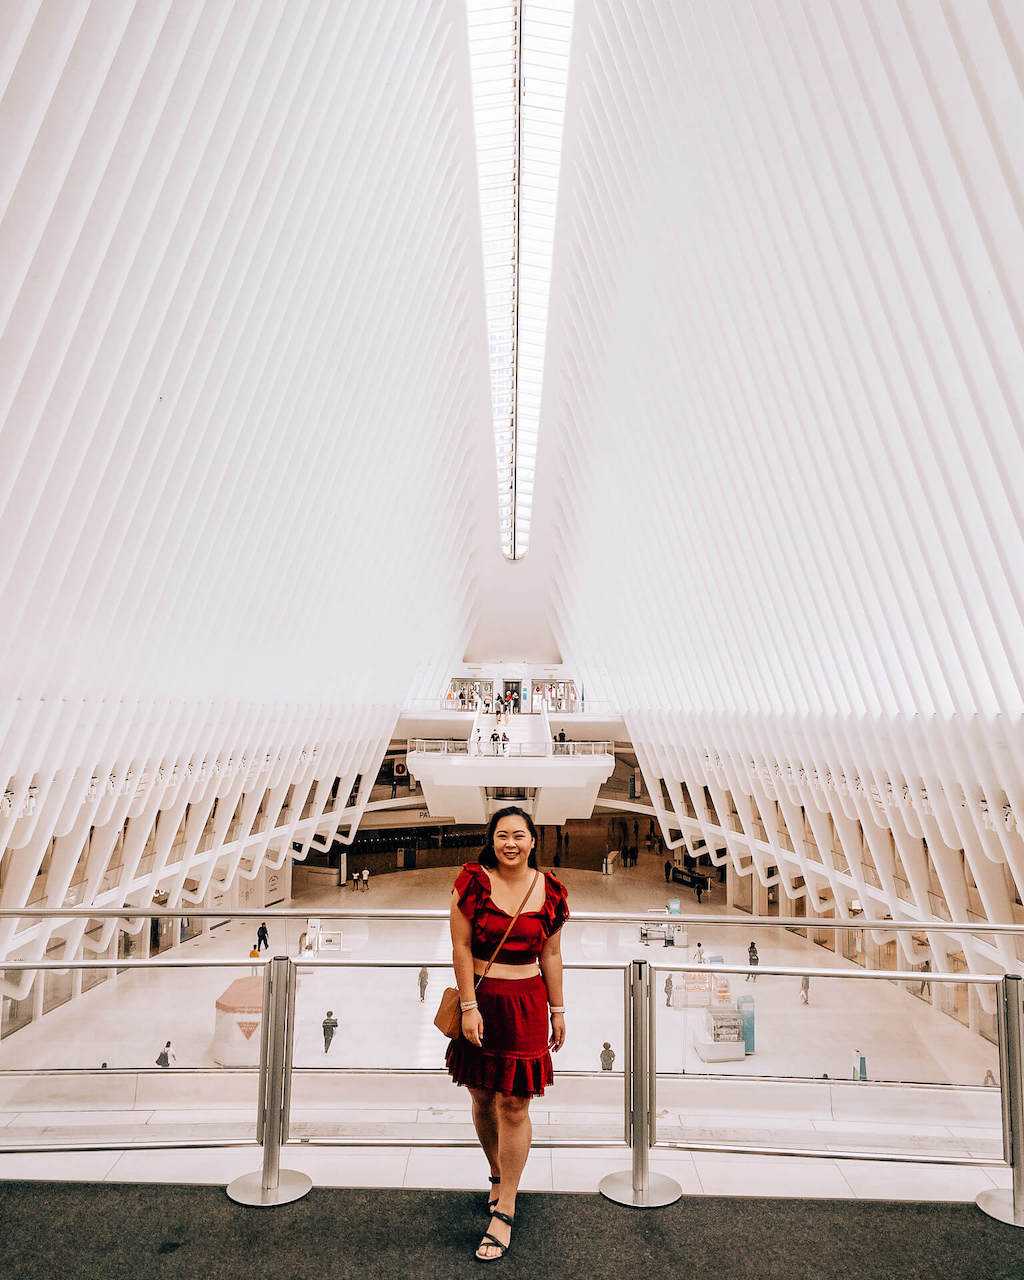 Instagrammable places in NYC The Oculus